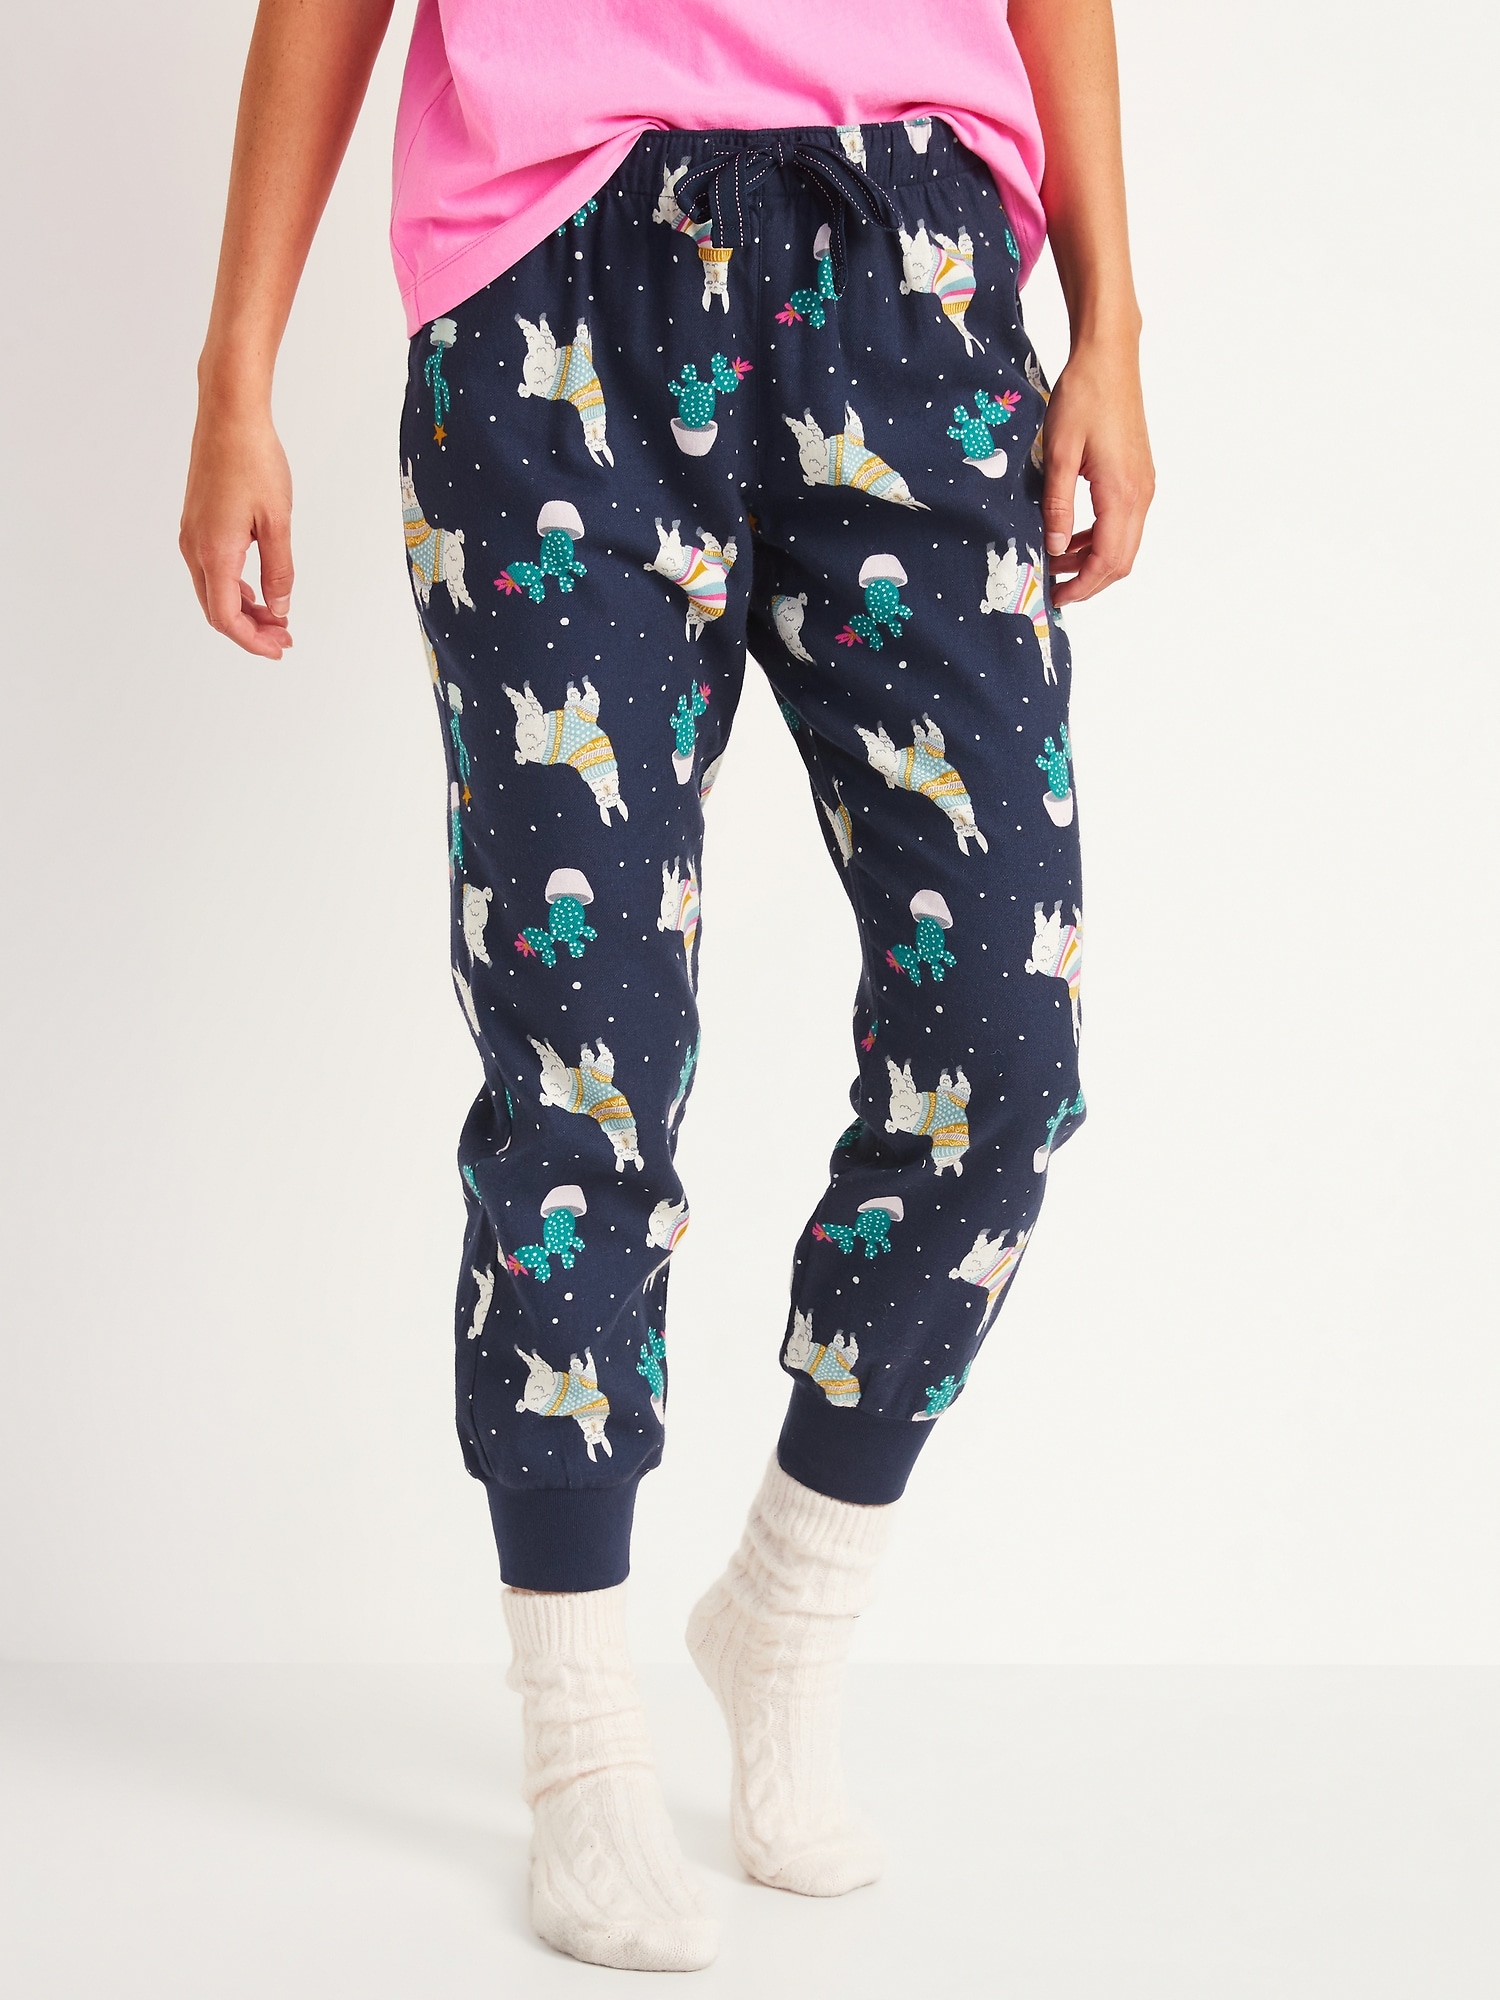 Patterned Flannel Jogger Pajama Pants for Women